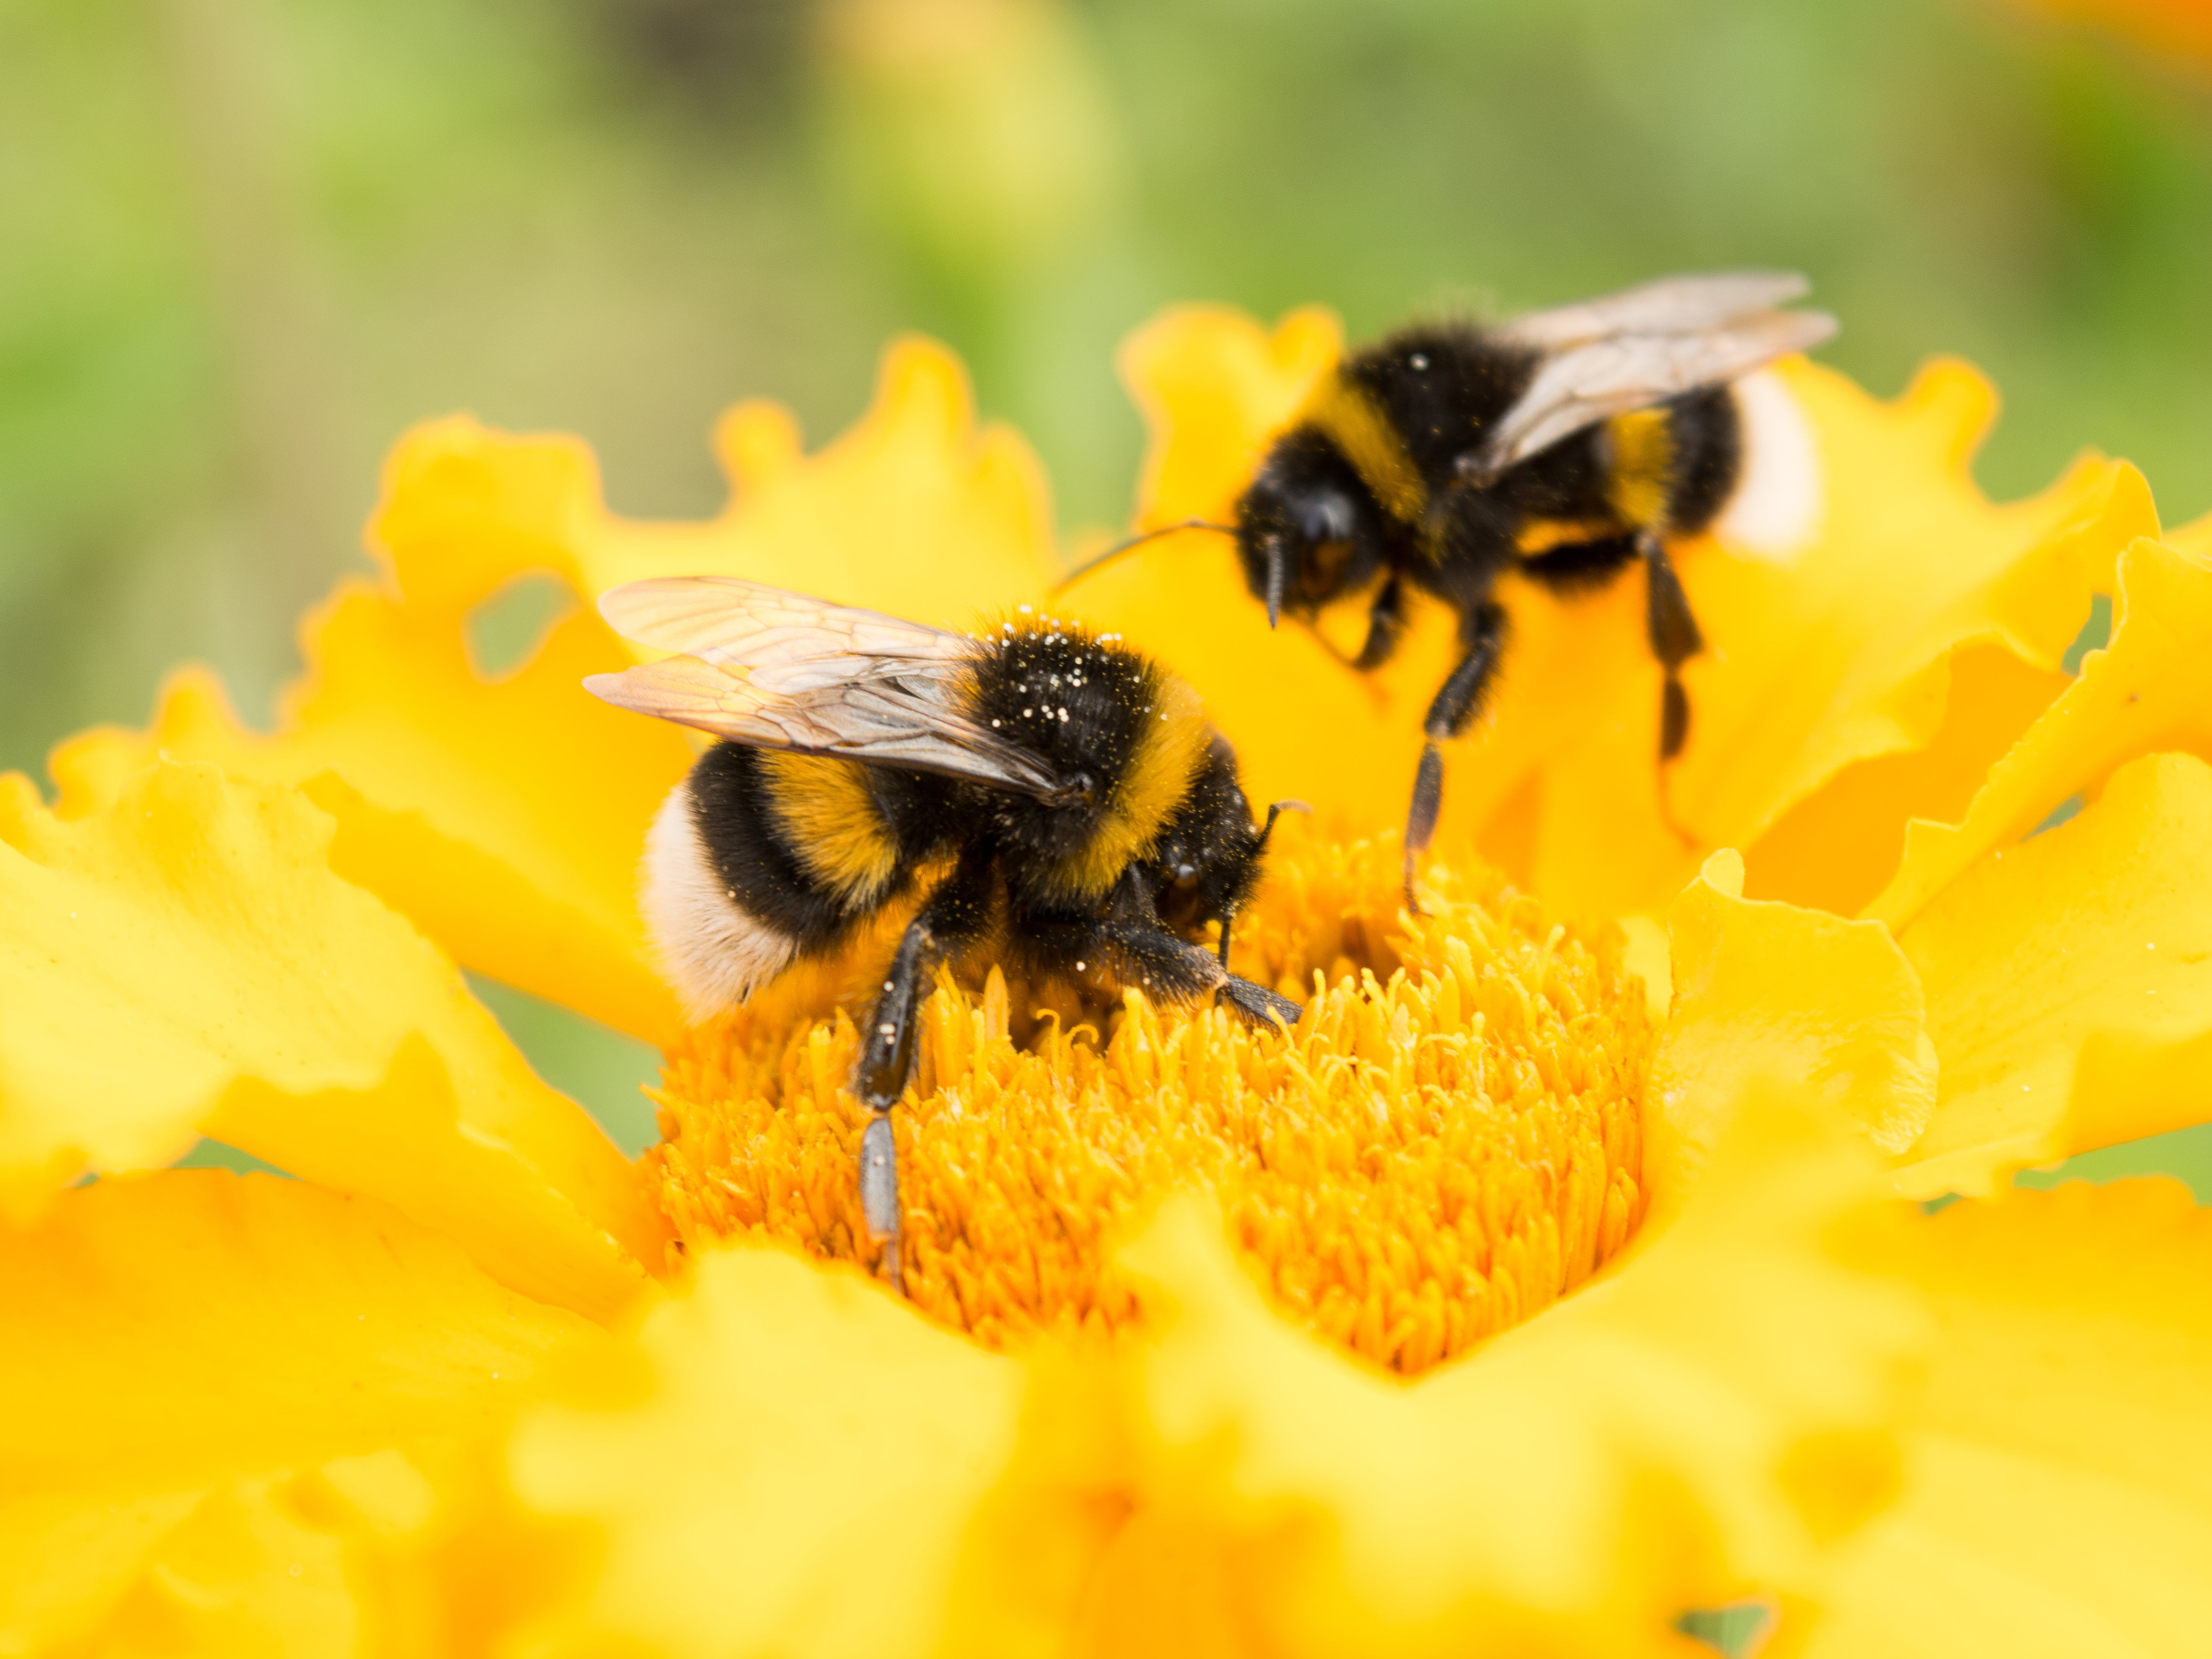 Climate change and pesticides can be blamed for declining bee populations